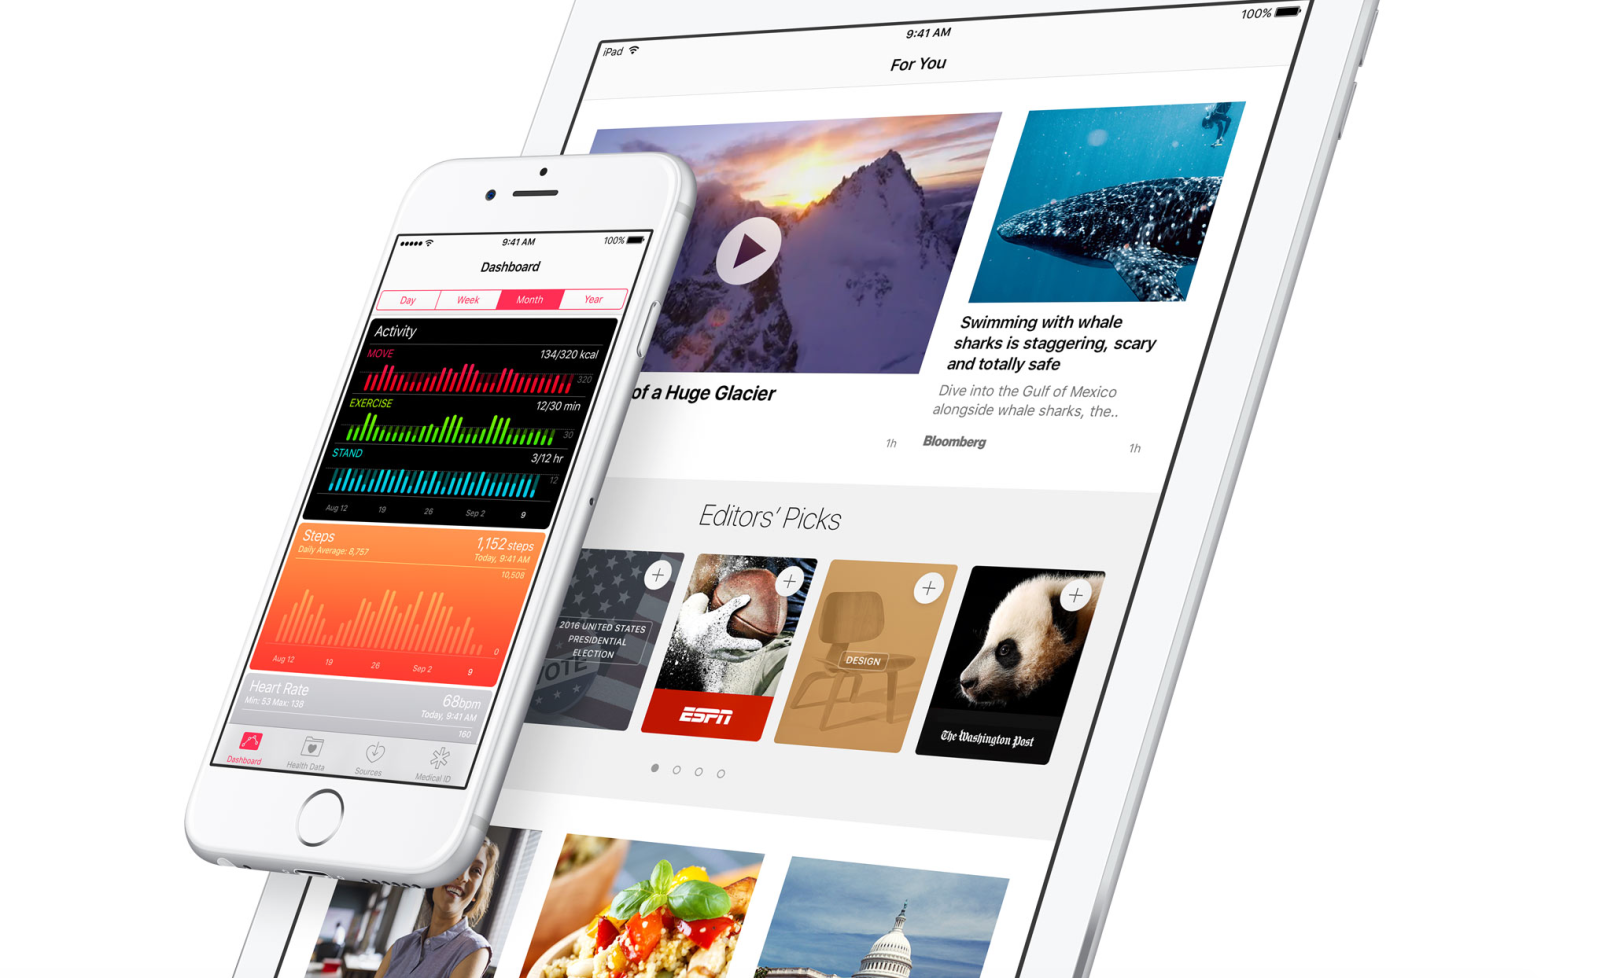 Apple exports iPhone 6 Plus and iPad 4 to vintage list, limiting service  options - 9to5Mac